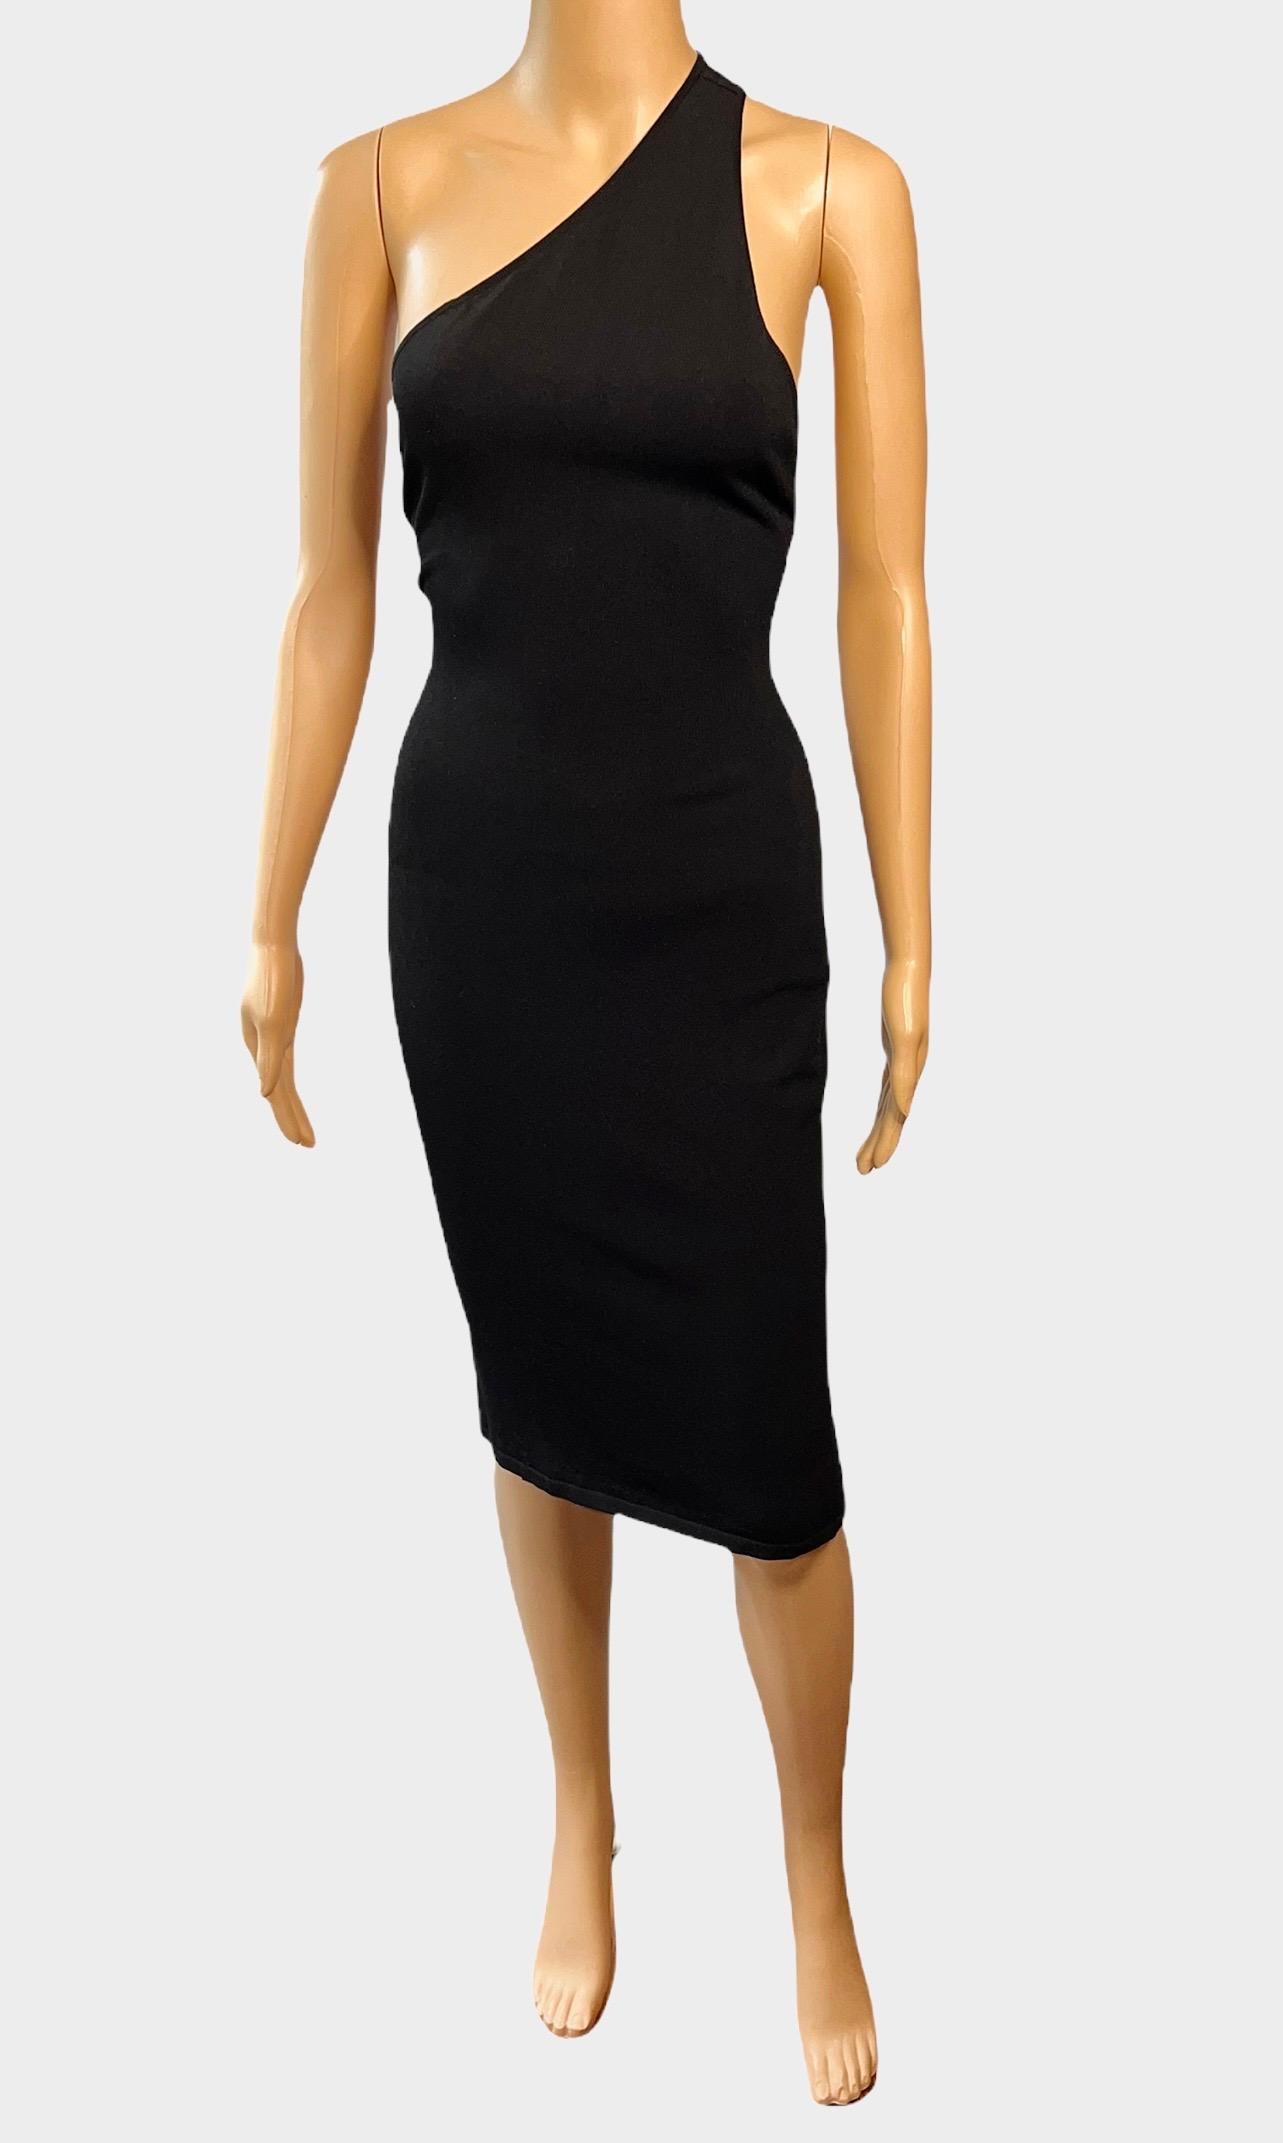 Tom Ford for Gucci S/S 2000 Cutout Bodycon Knit Black Dress For Sale 5